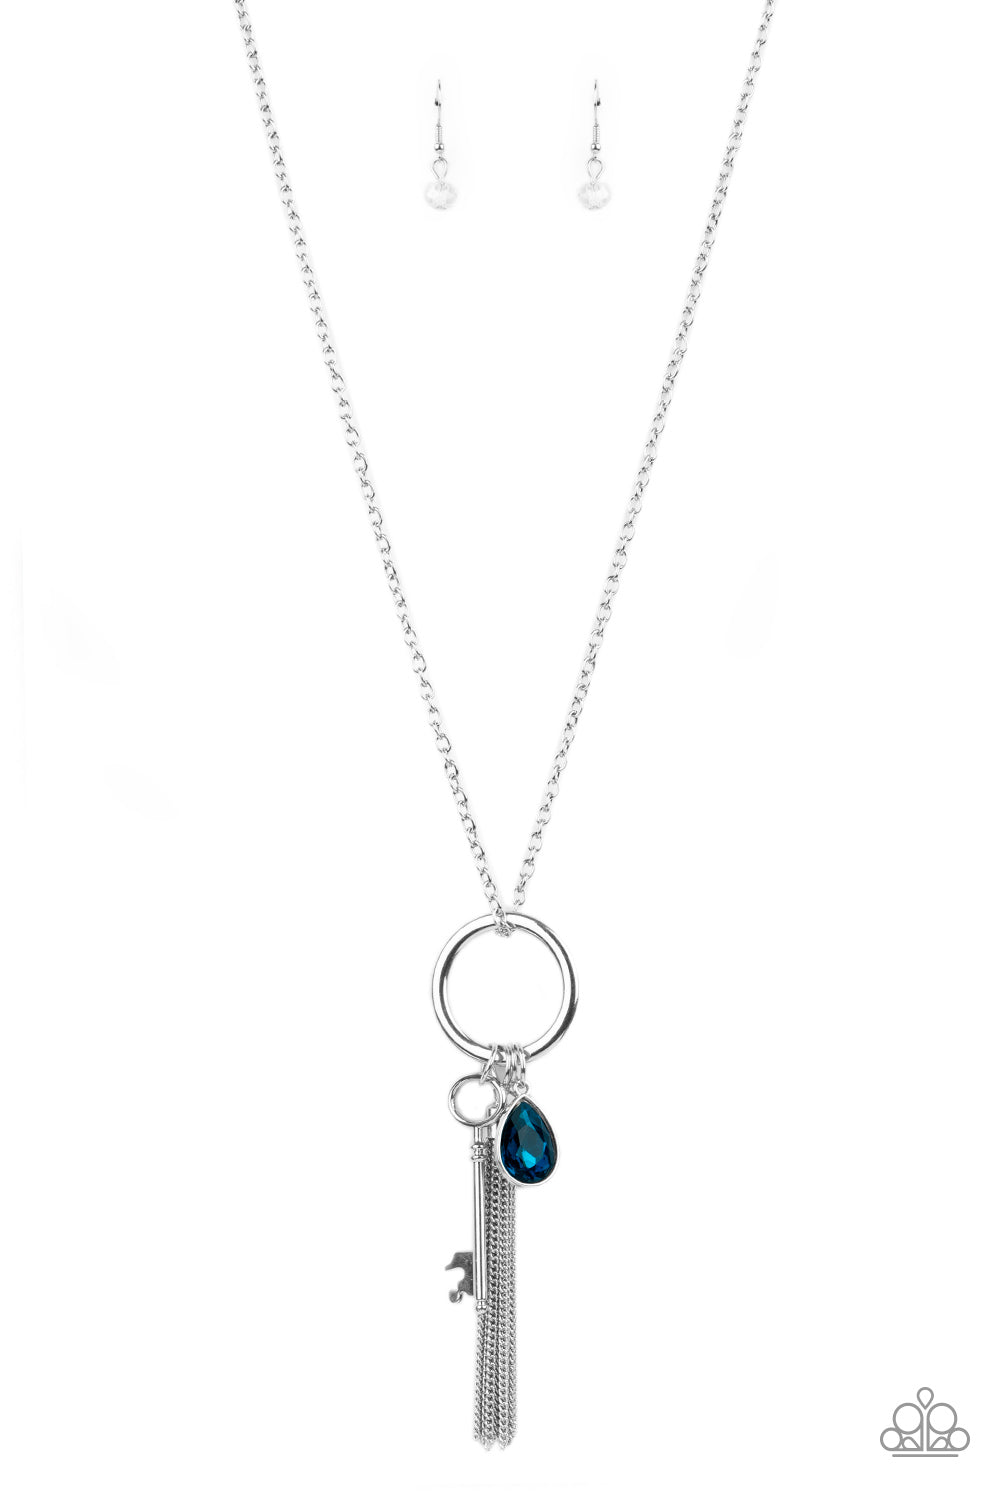 A blue teardrop gem, silver key, dainty crystal-like bead, and shimmery silver chain tassel swings from the bottom of a silver ring at the bottom of a lengthened silver chain, creating a whimsically tasseled display. Features an adjustable clasp closure.